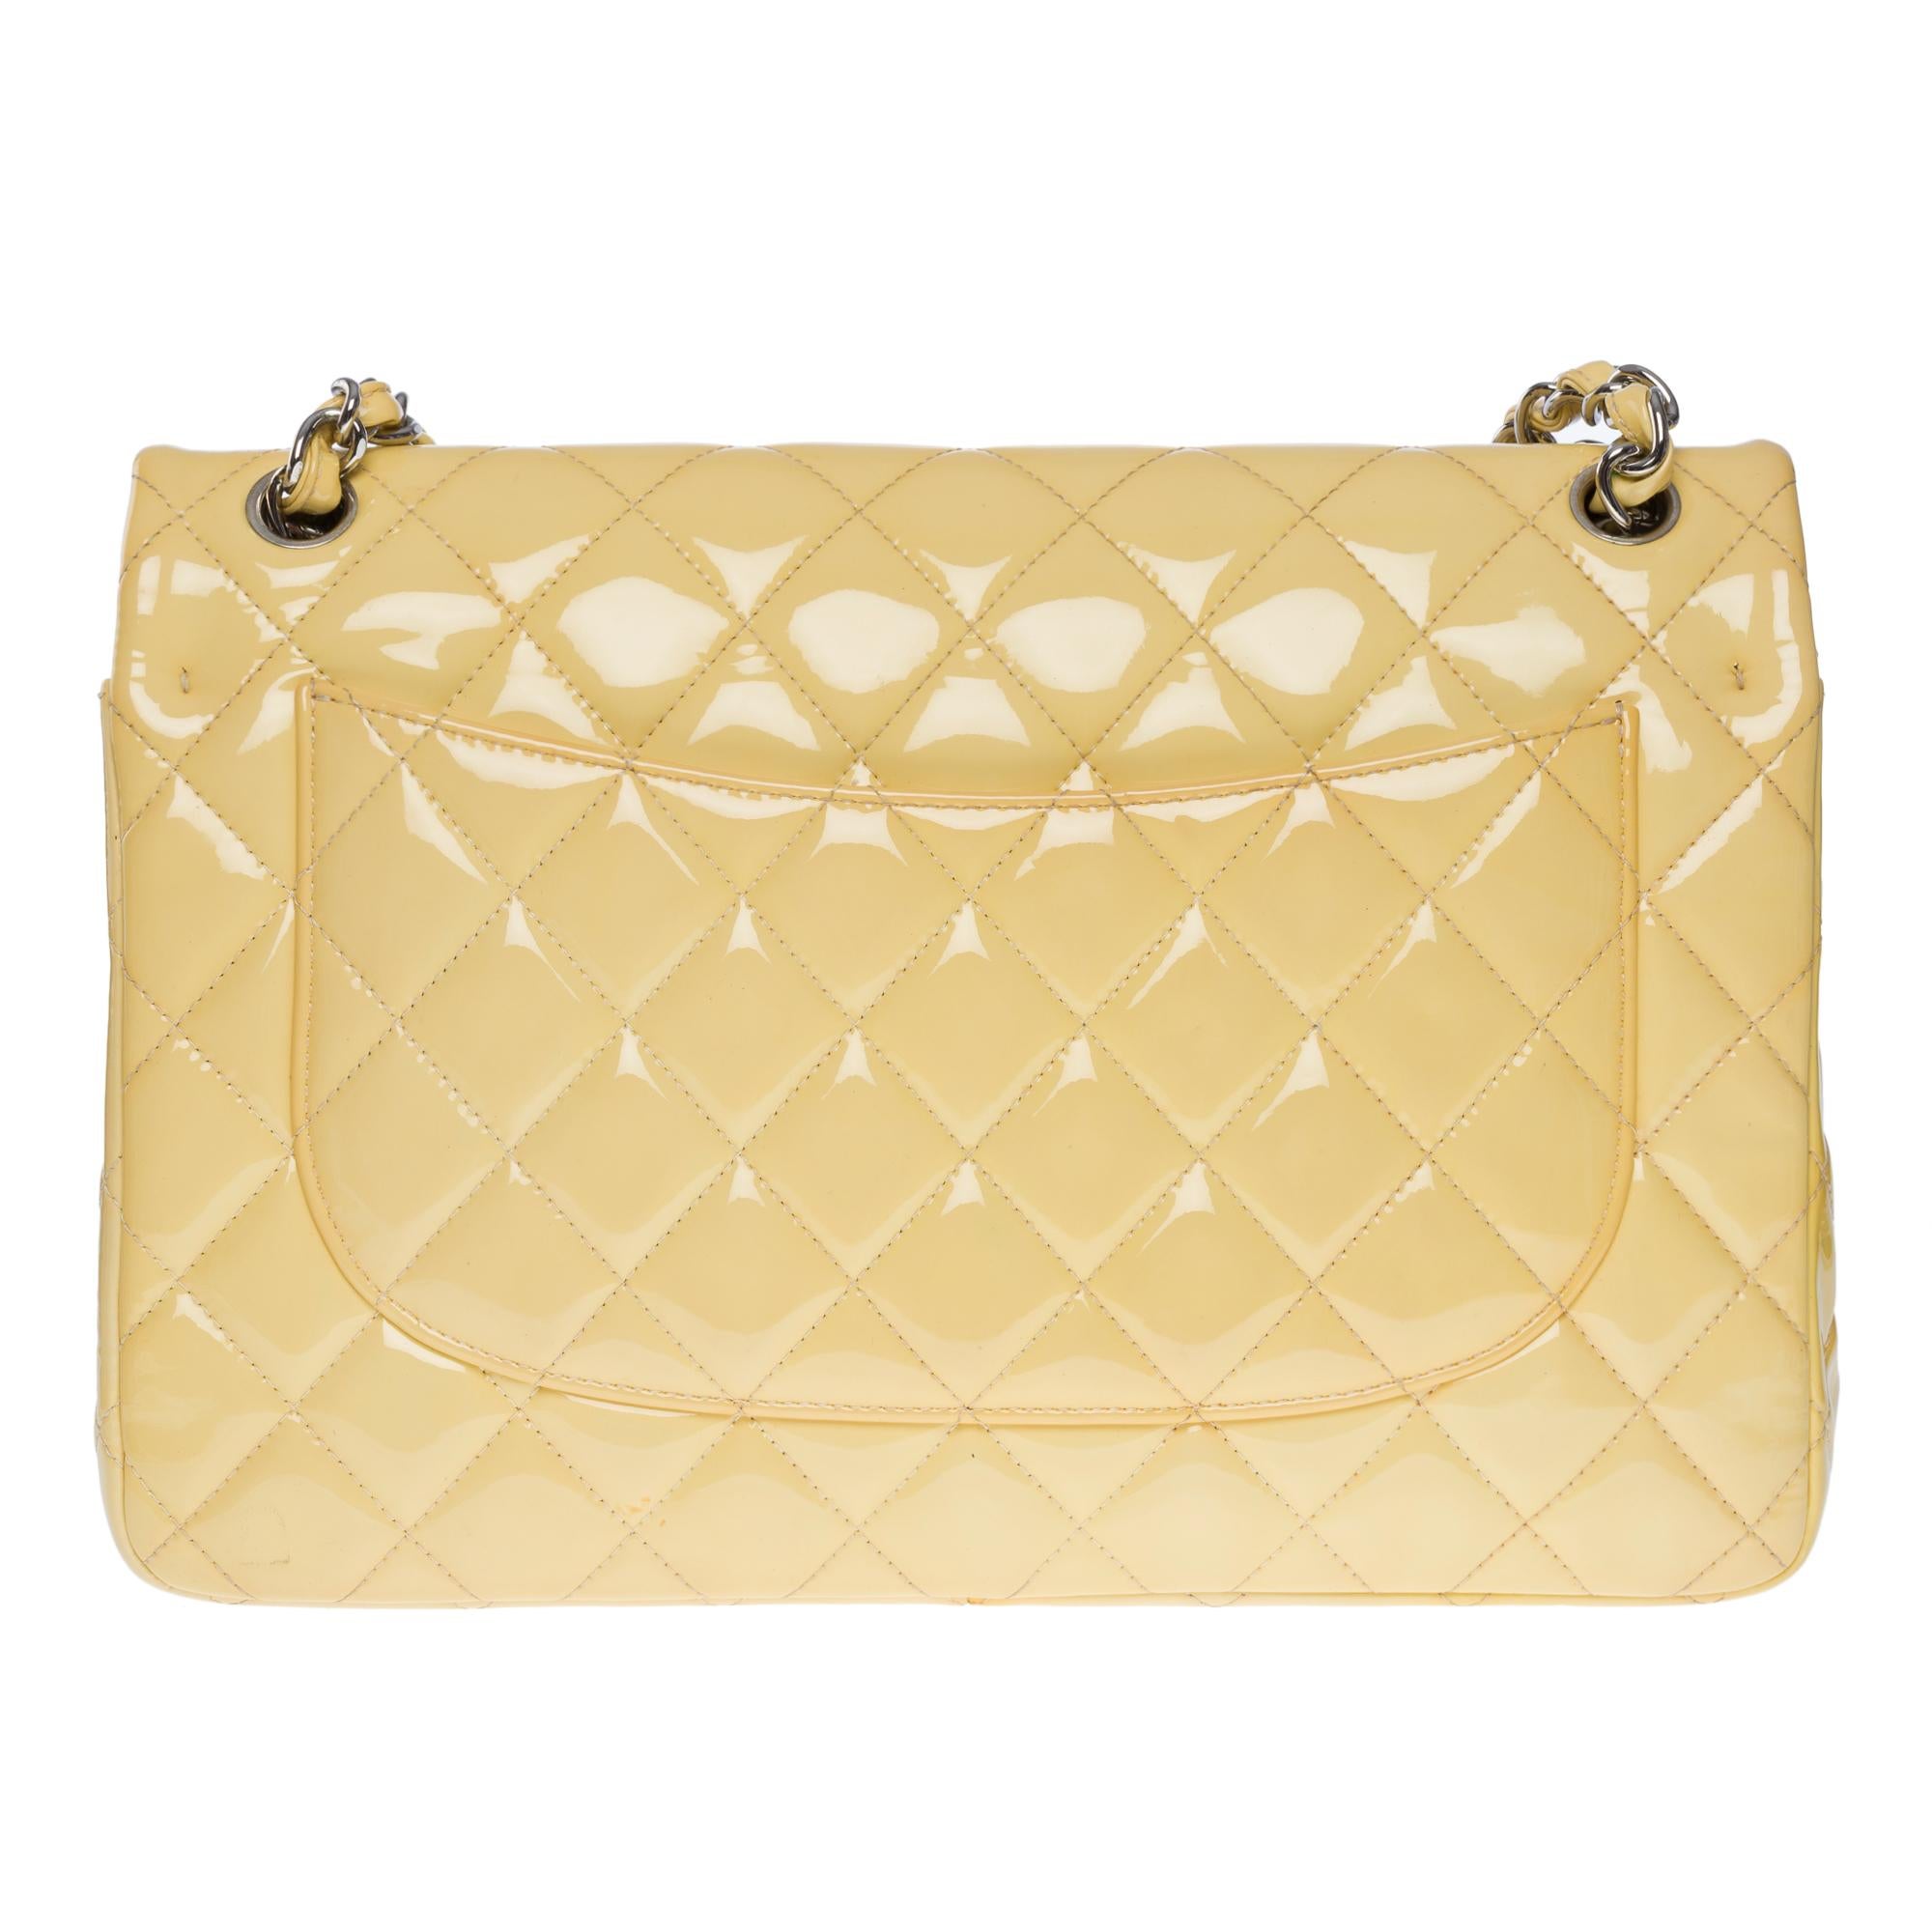 Beautiful Chanel Timeless jumbo double flap shoulder bag in yellow quilted patent leather, silver metal hardware, silver silver chain handle interwoven with yellow patent leather for a hand or shoulder or crossbody

Silver metal logo closure on